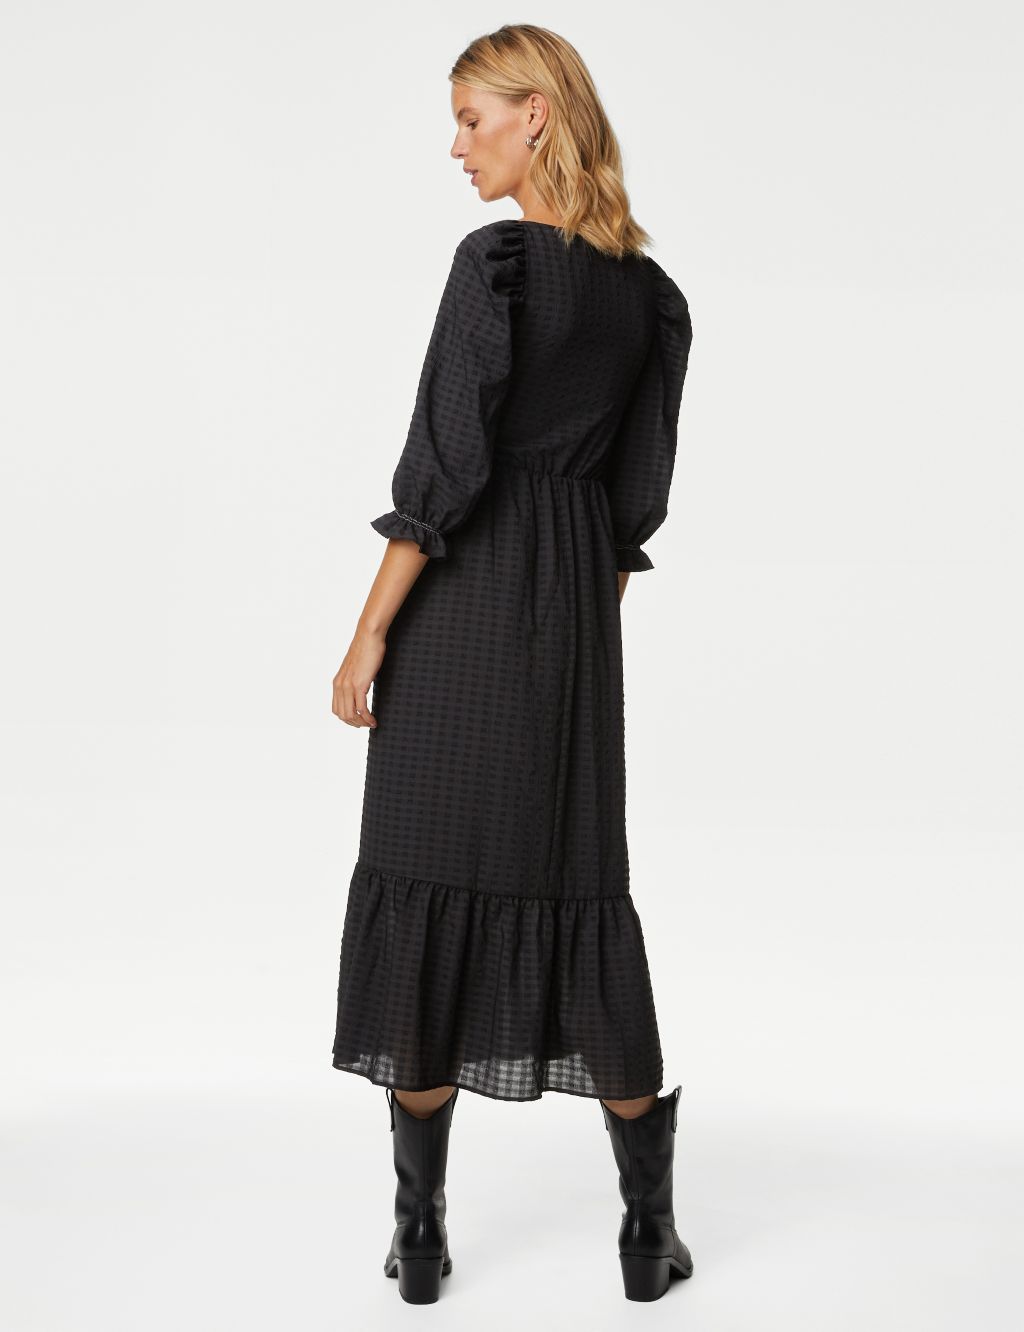 Textured Square Neck Shirred Midaxi Dress image 4